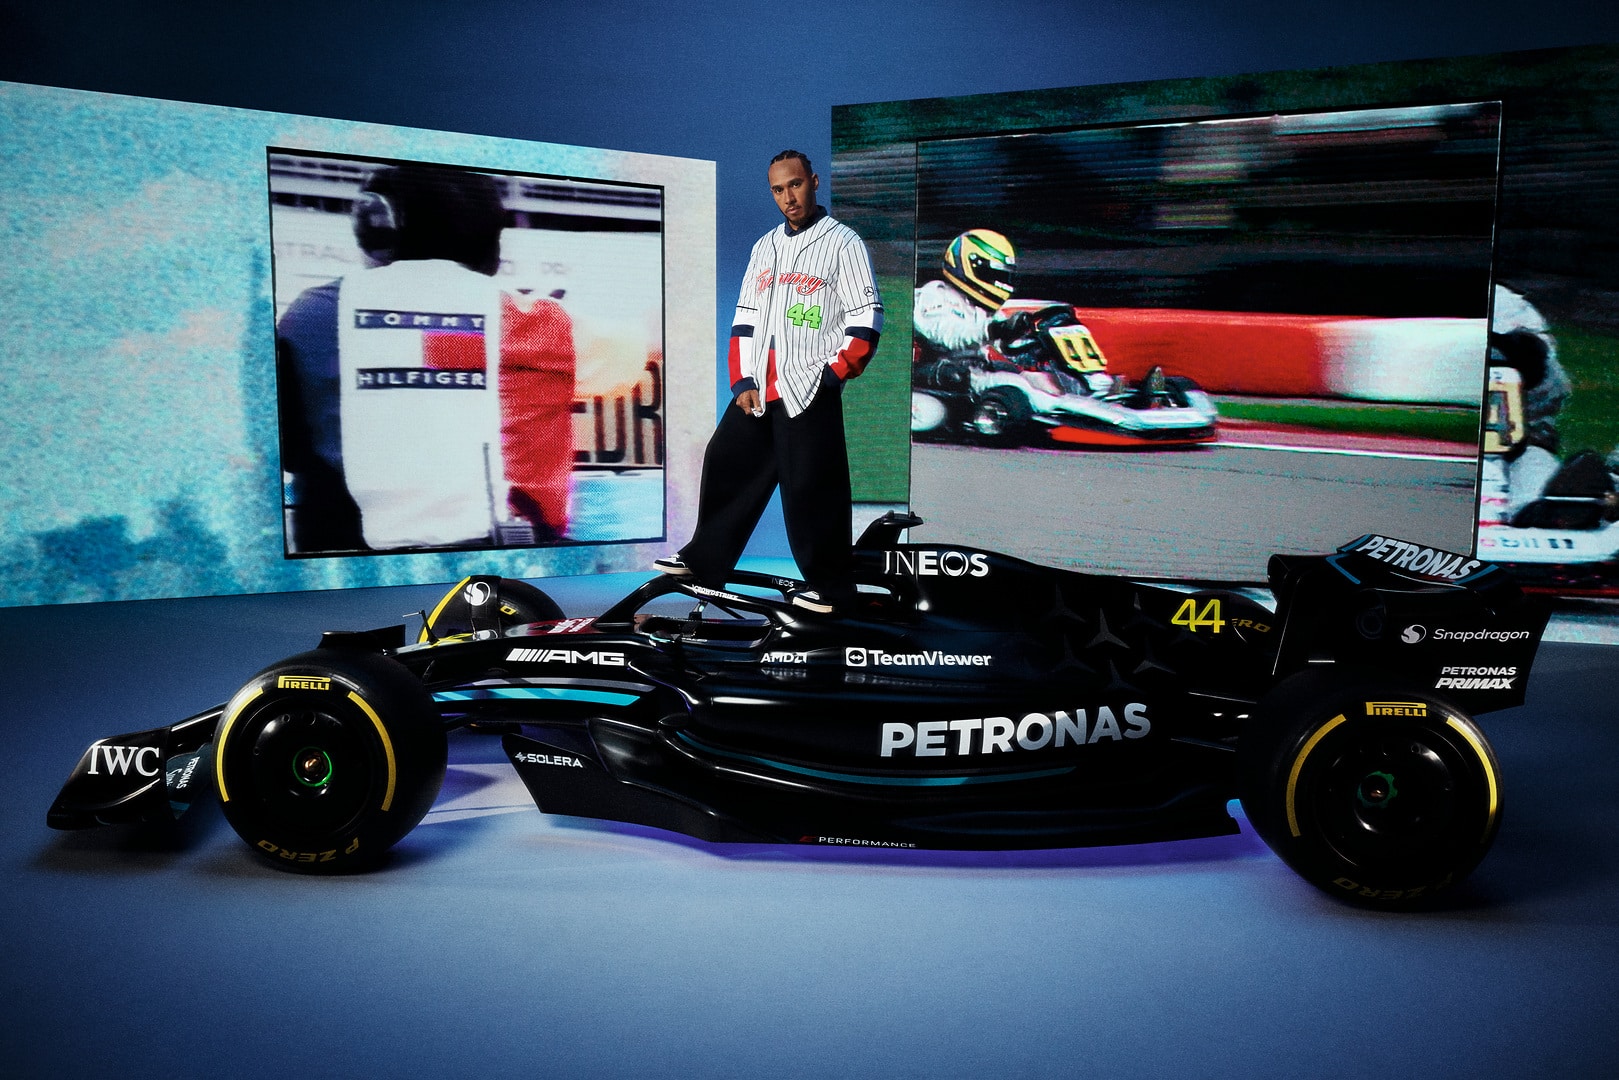 How Do Corporate Partnerships Work in Formula 1